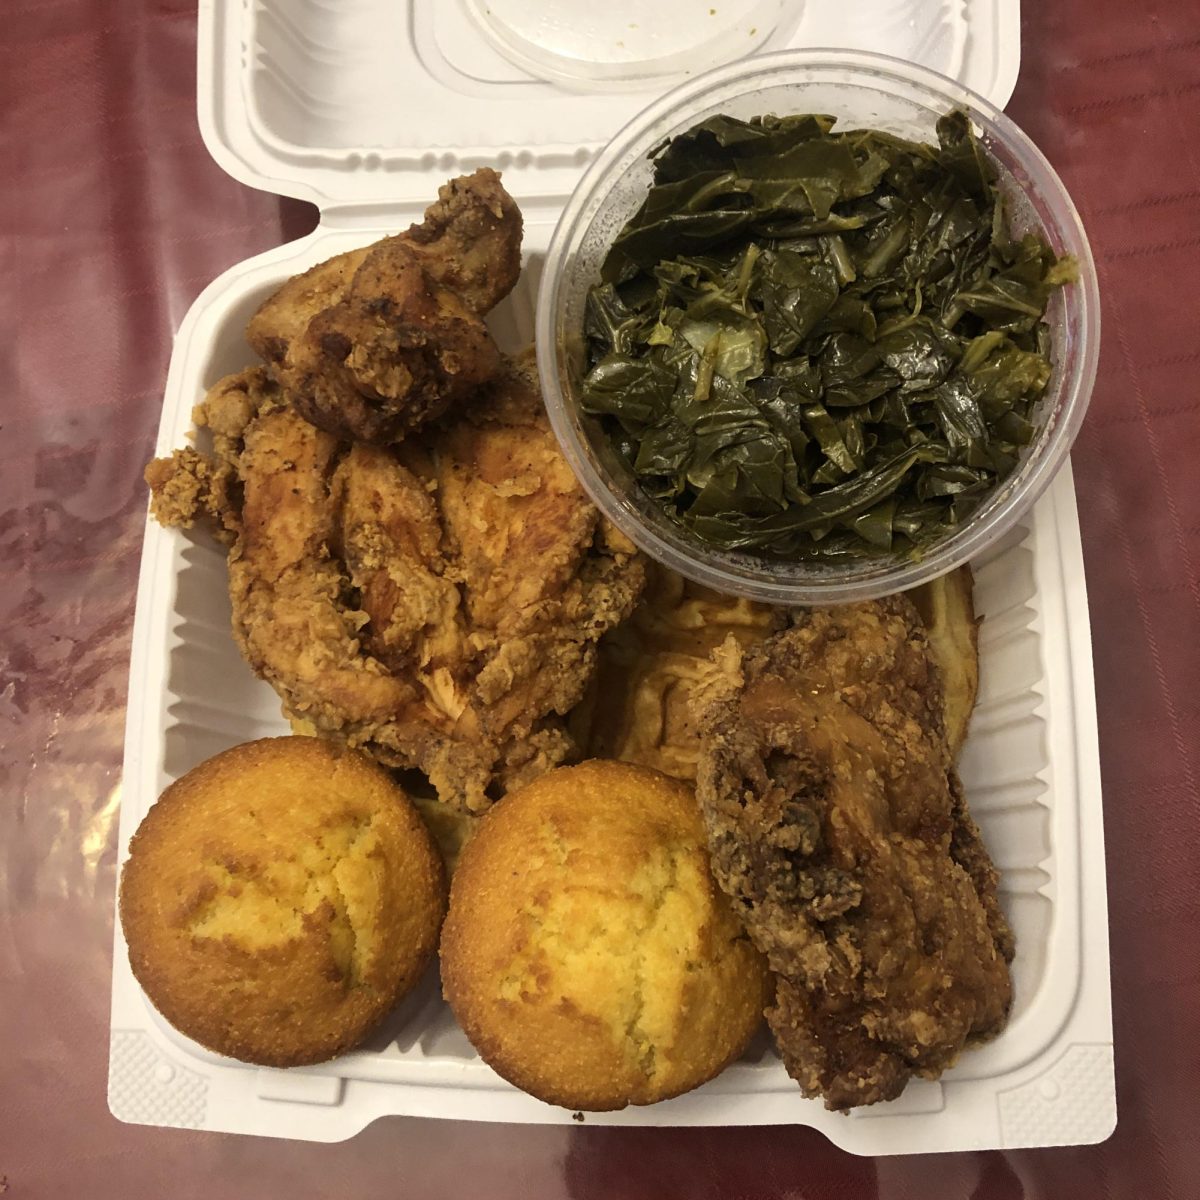 Take-out container filled to the brim with soul food staples.